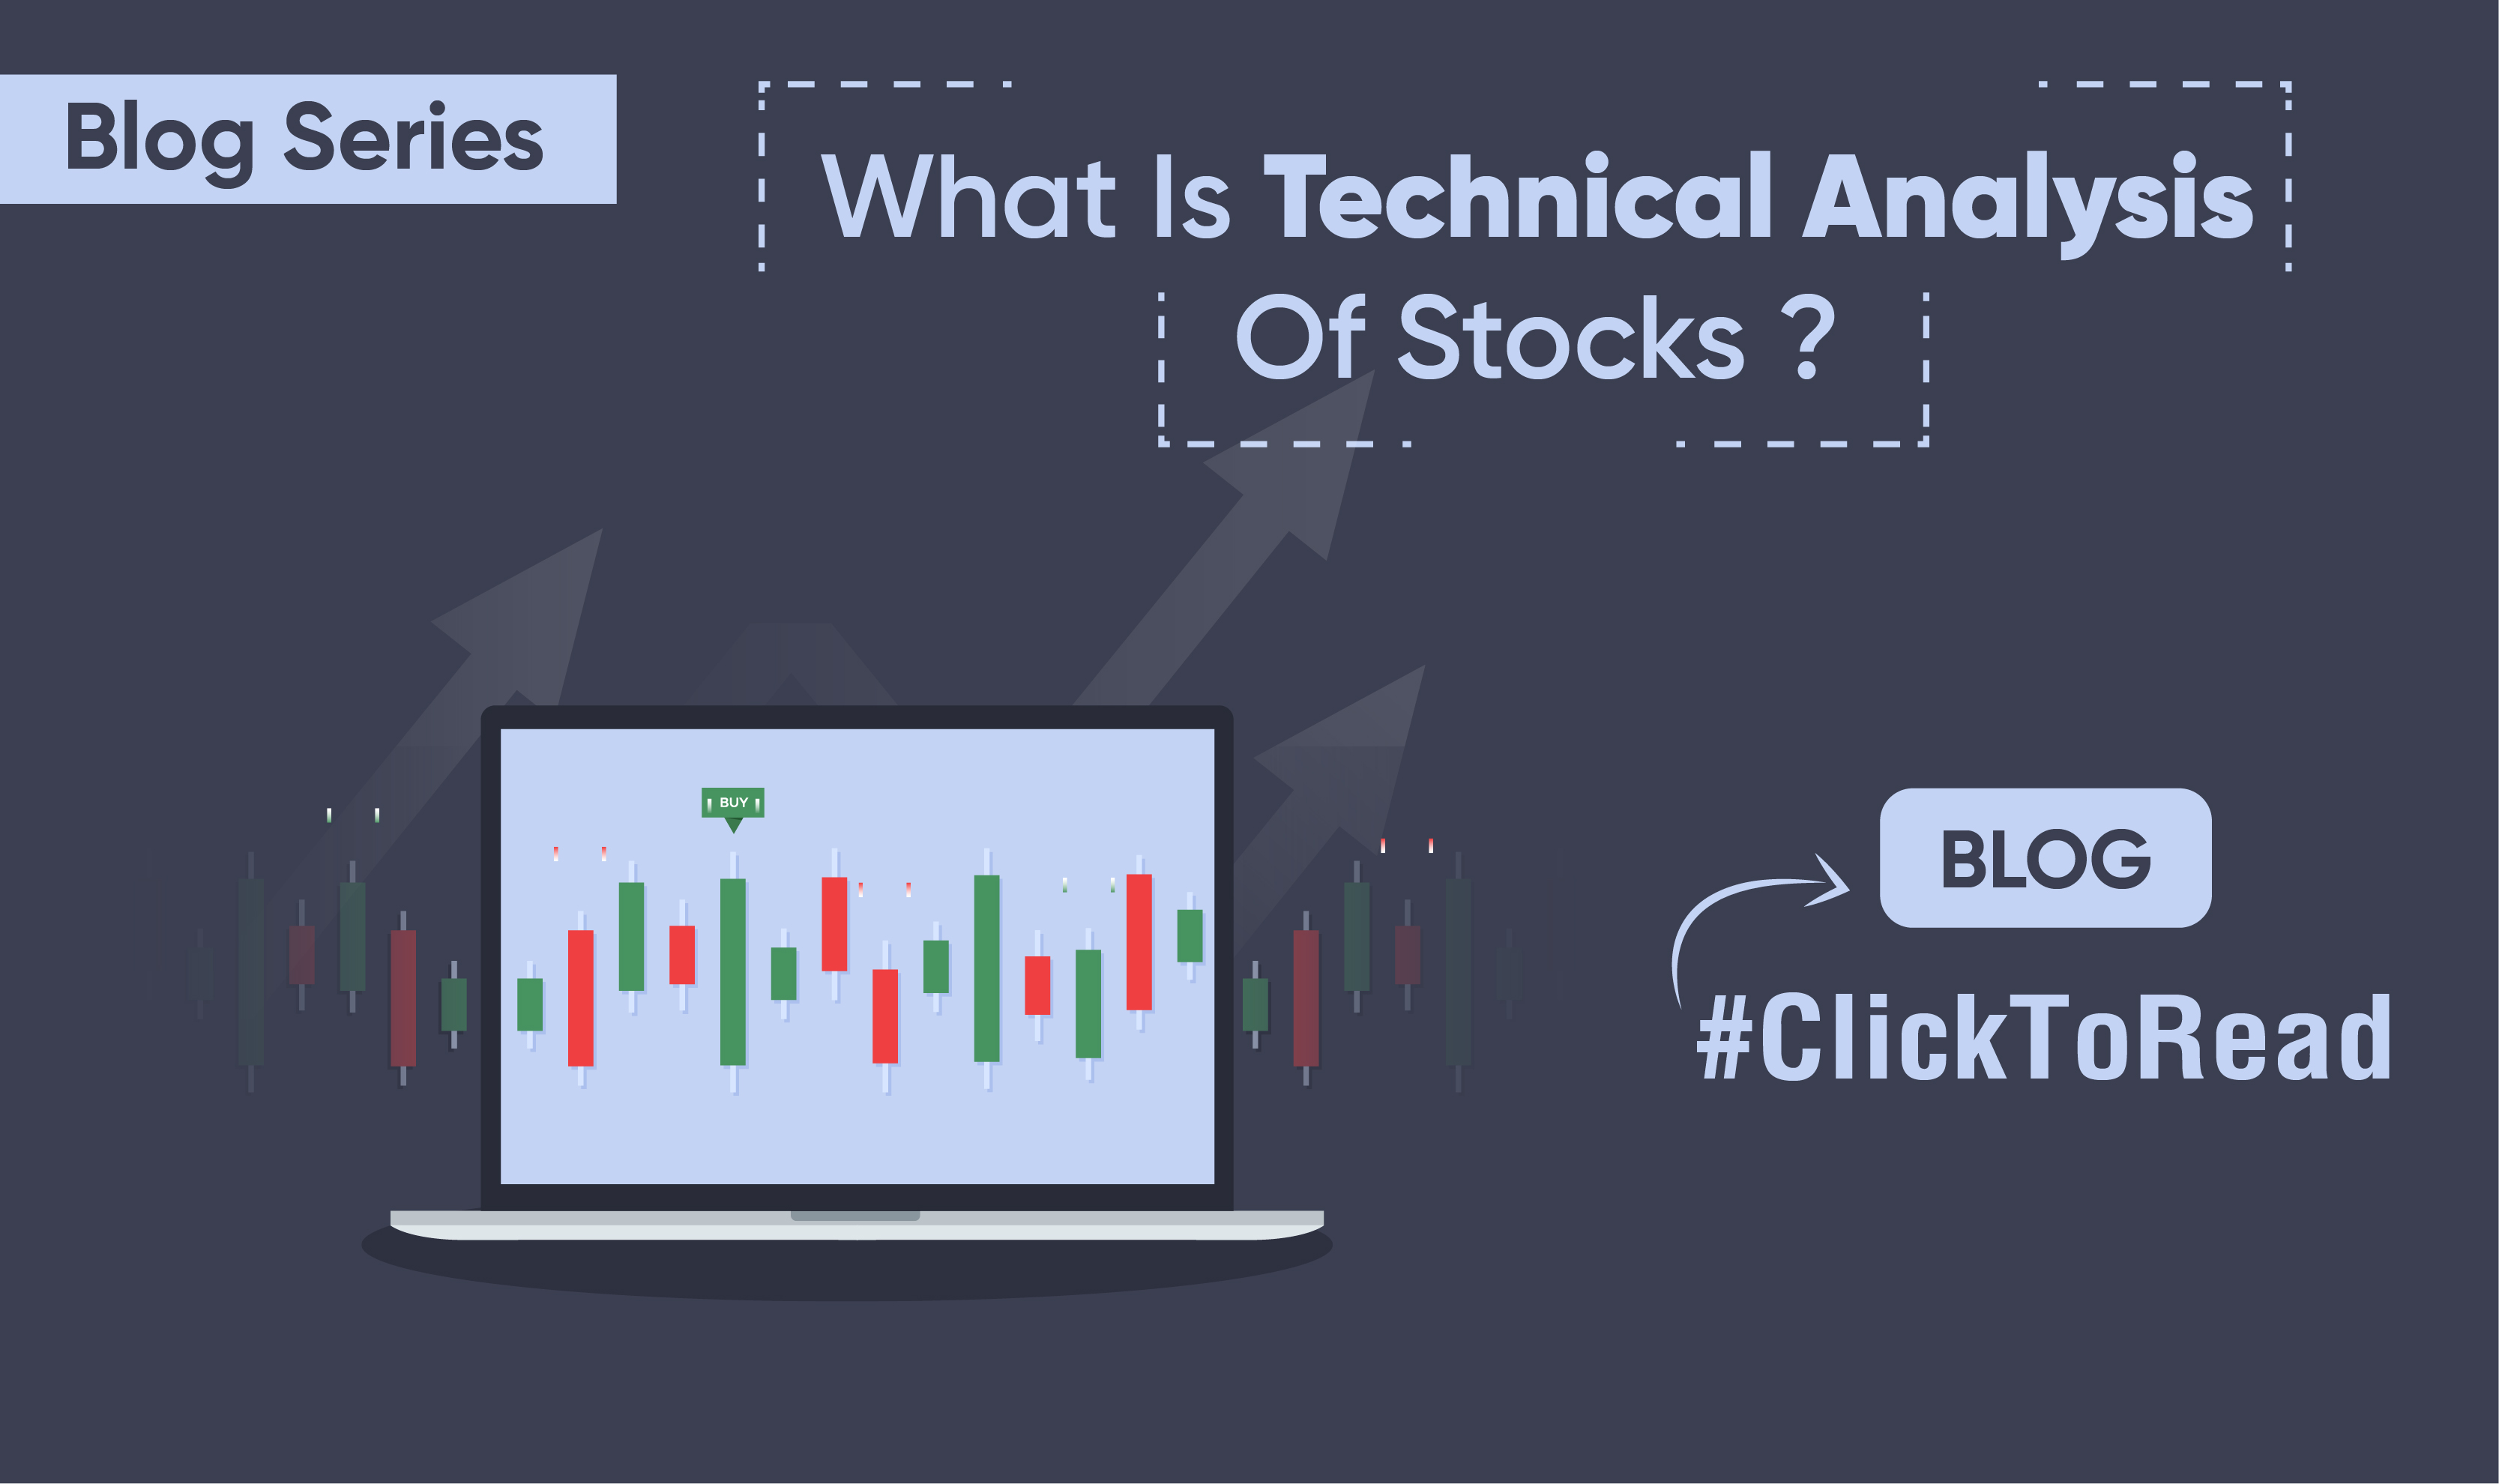 What is technical analysis of stocks?